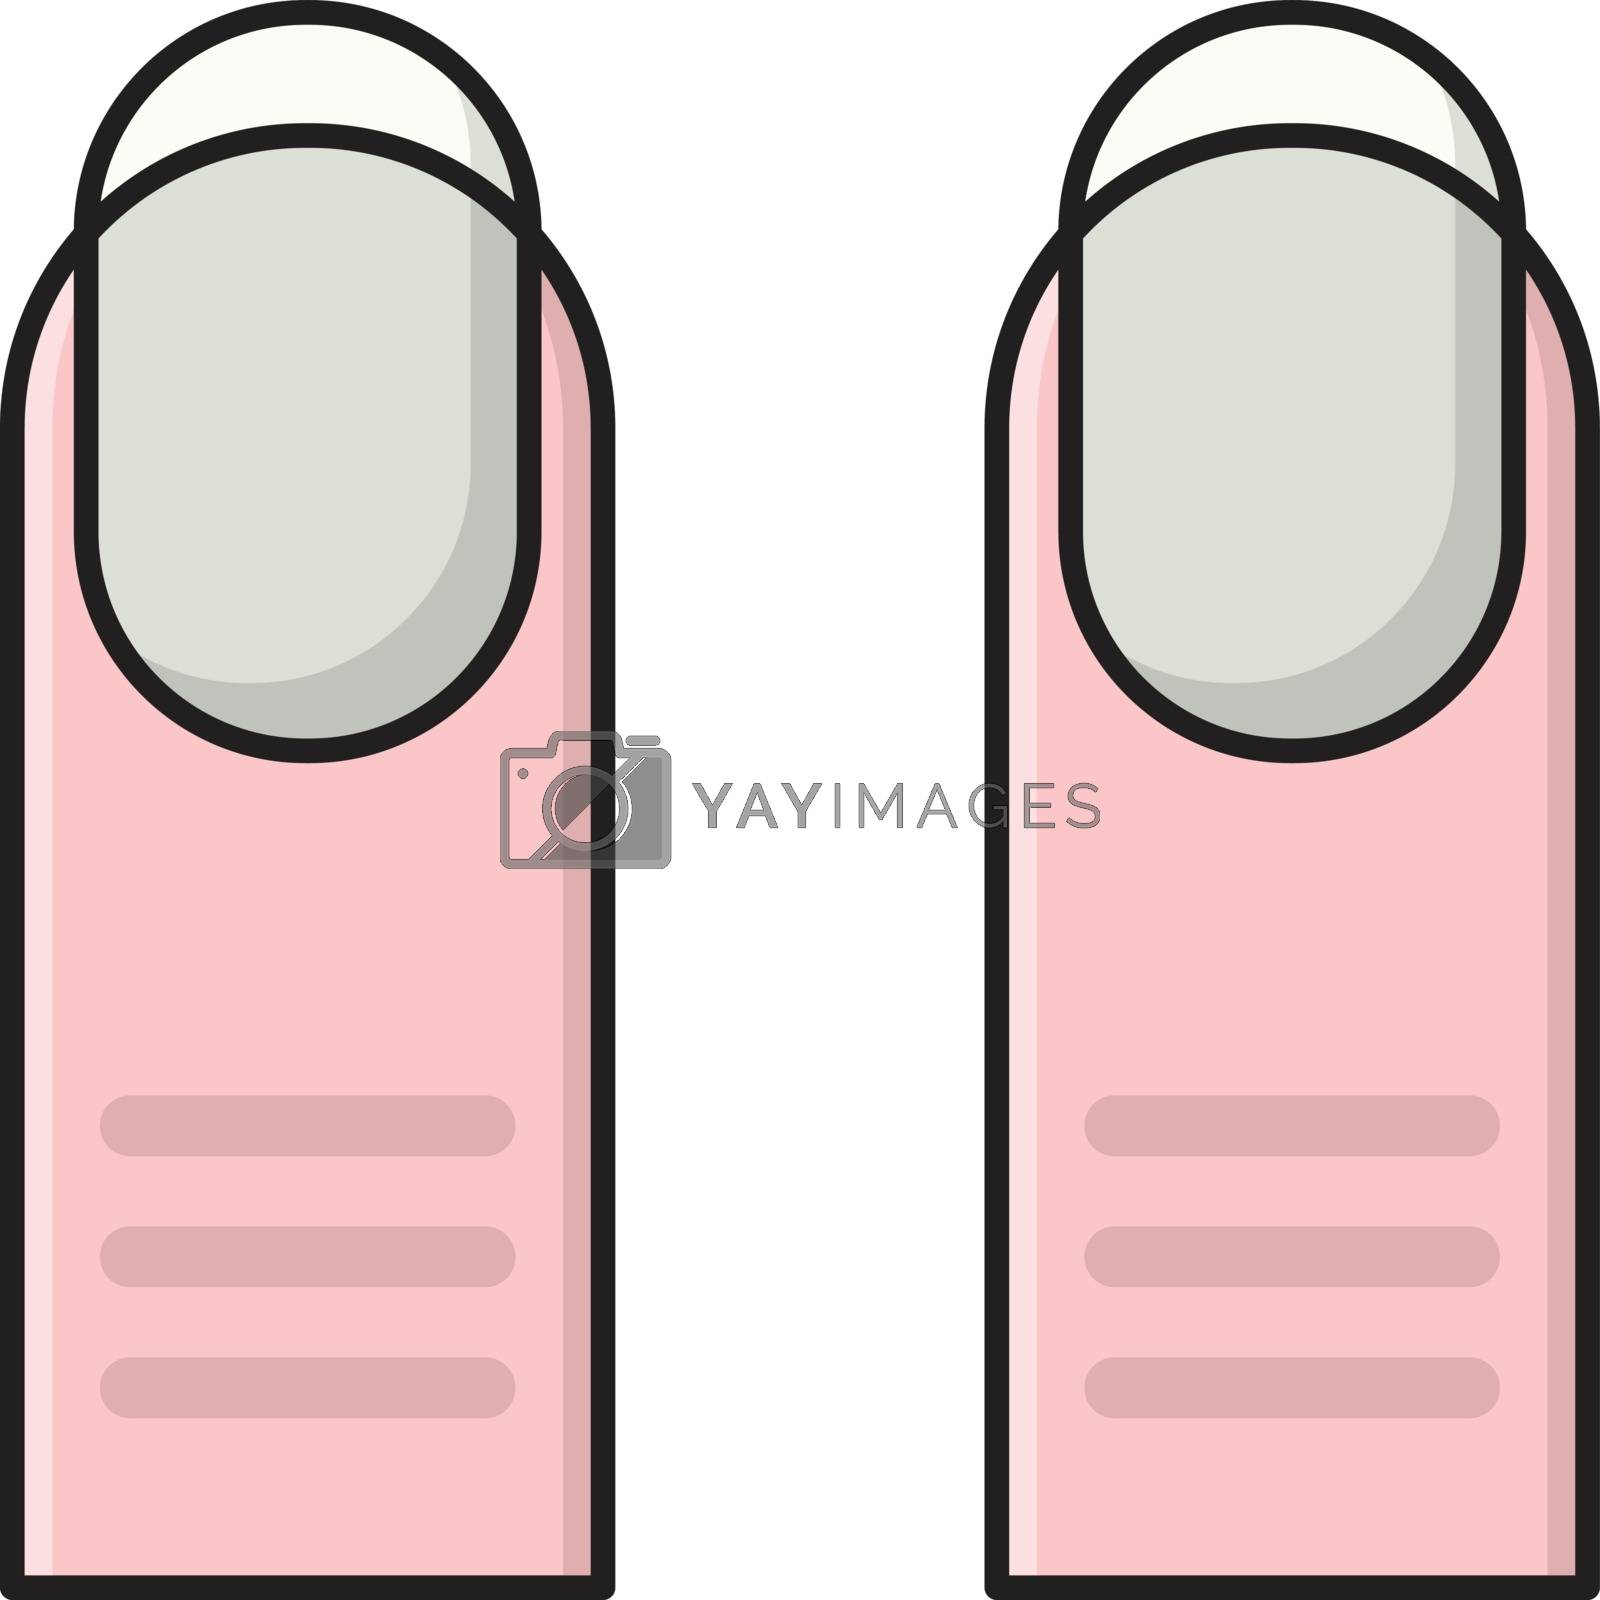 Royalty free image of finger  by vectorstall